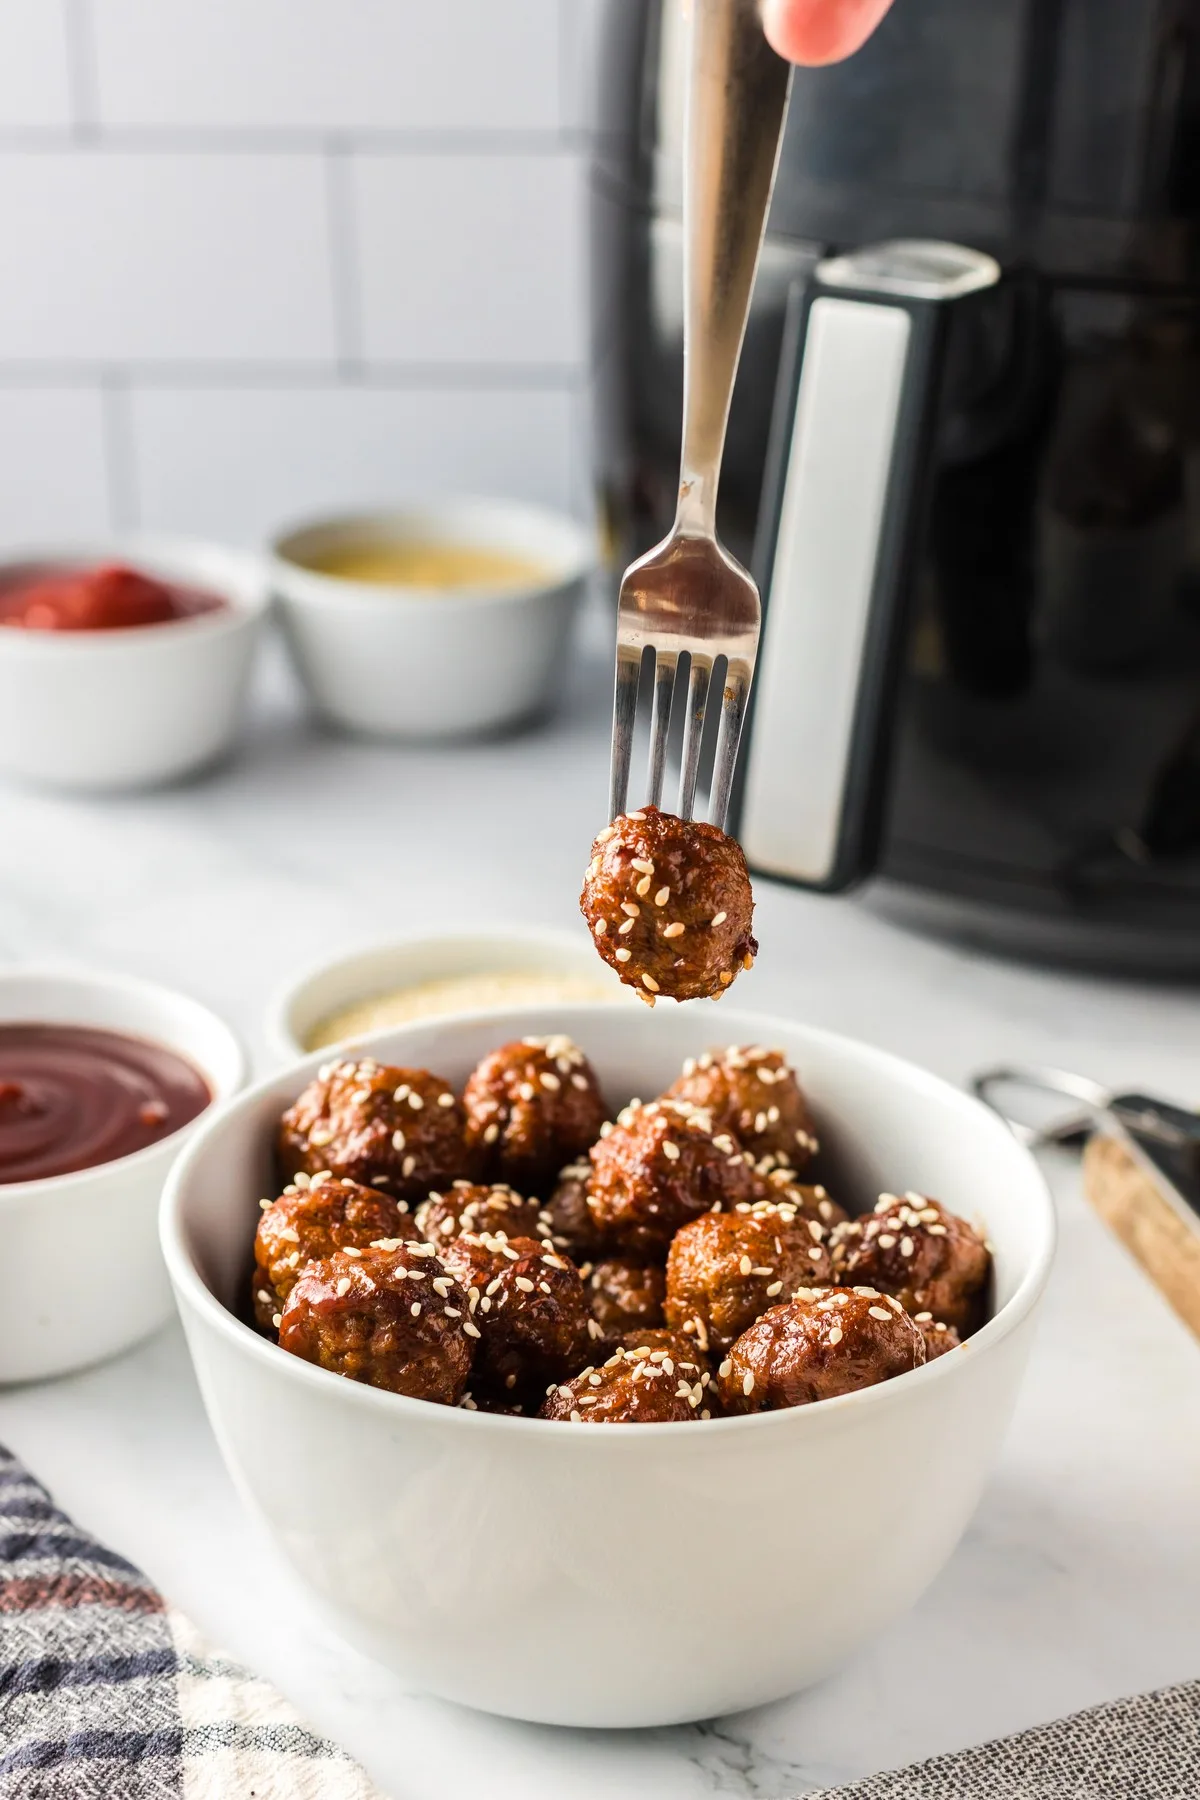 meatballs with sesame seeds